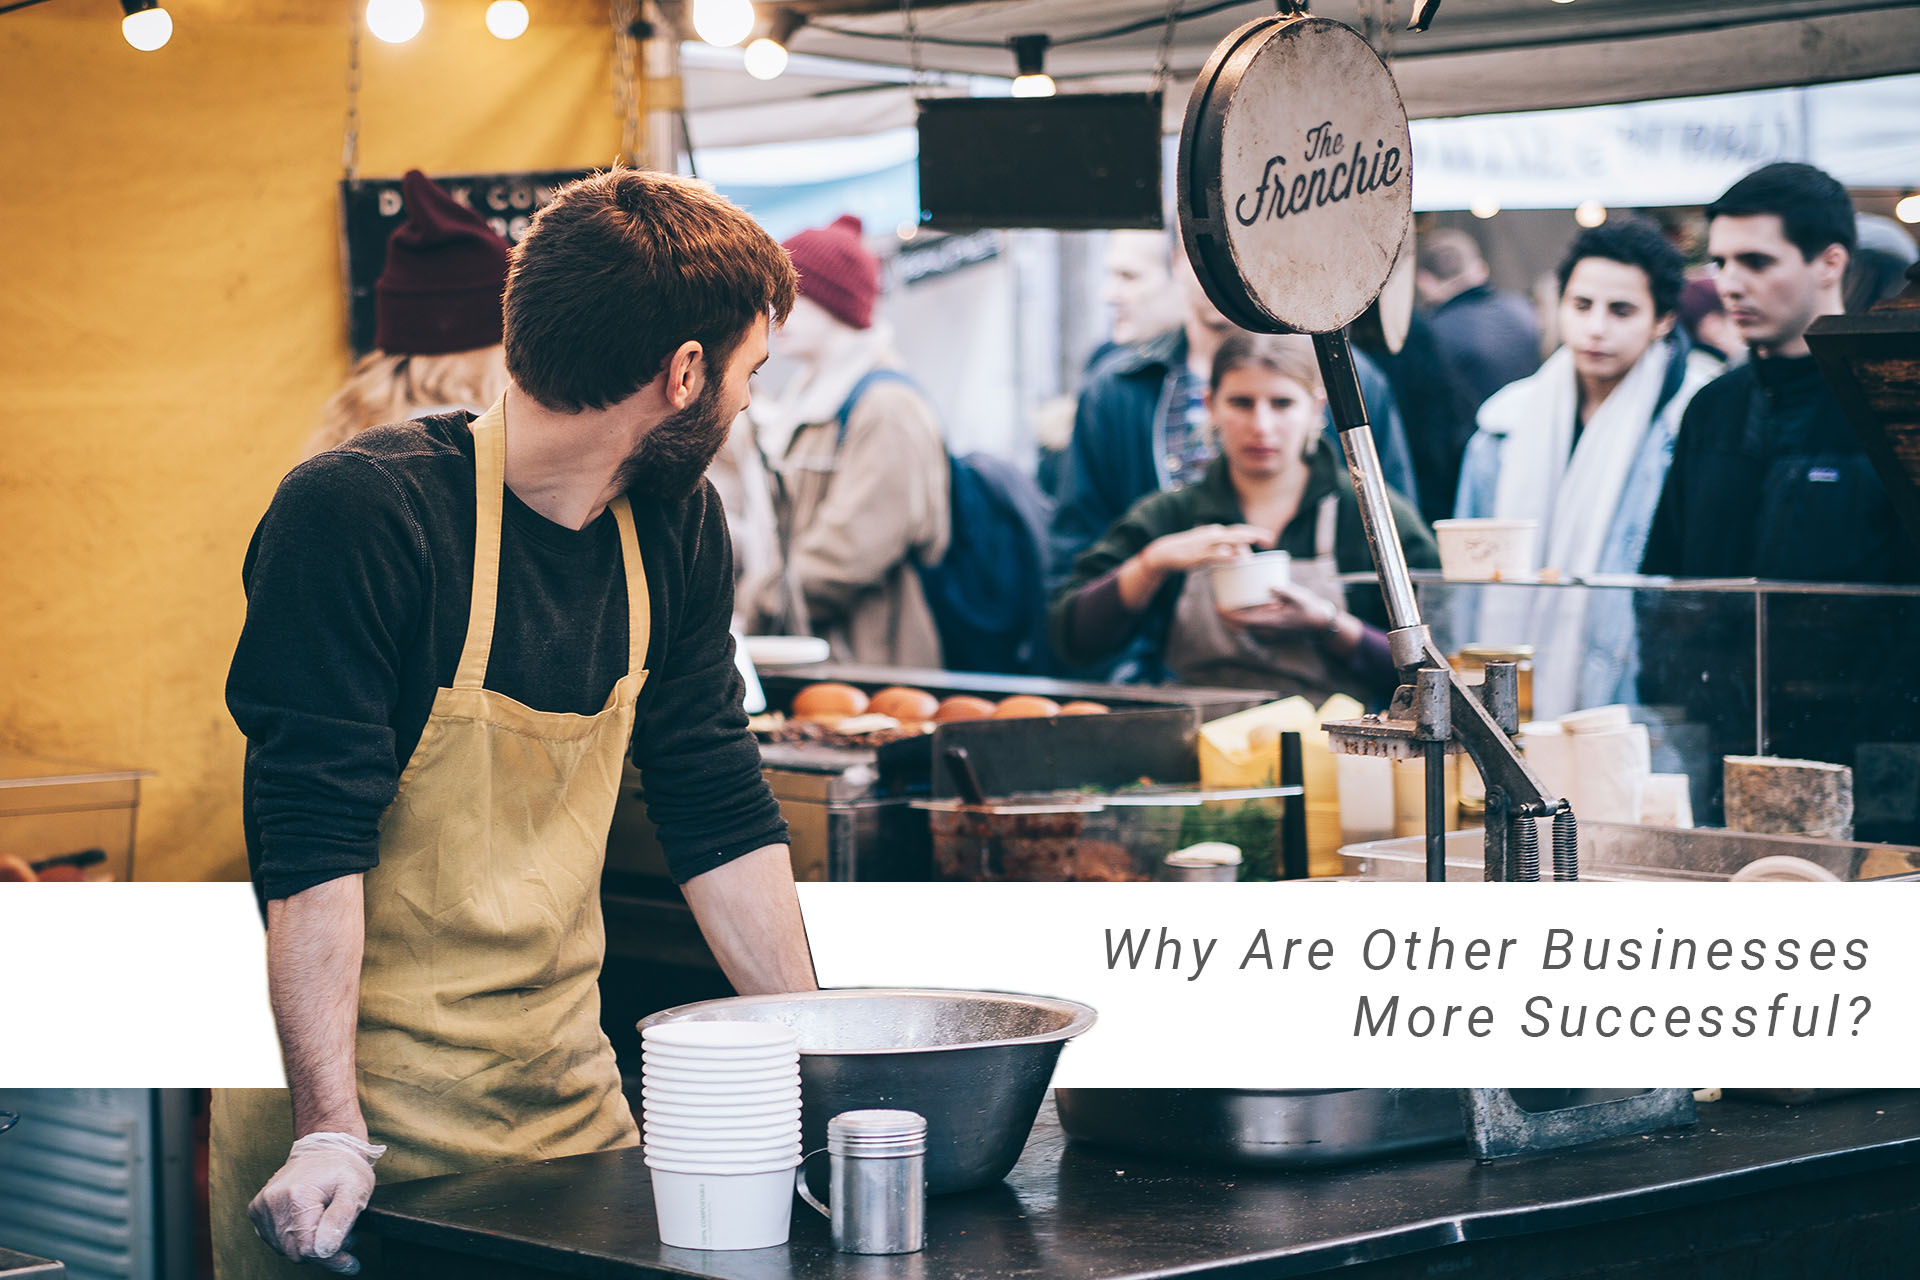 Why Are Other Businesses More Successful?